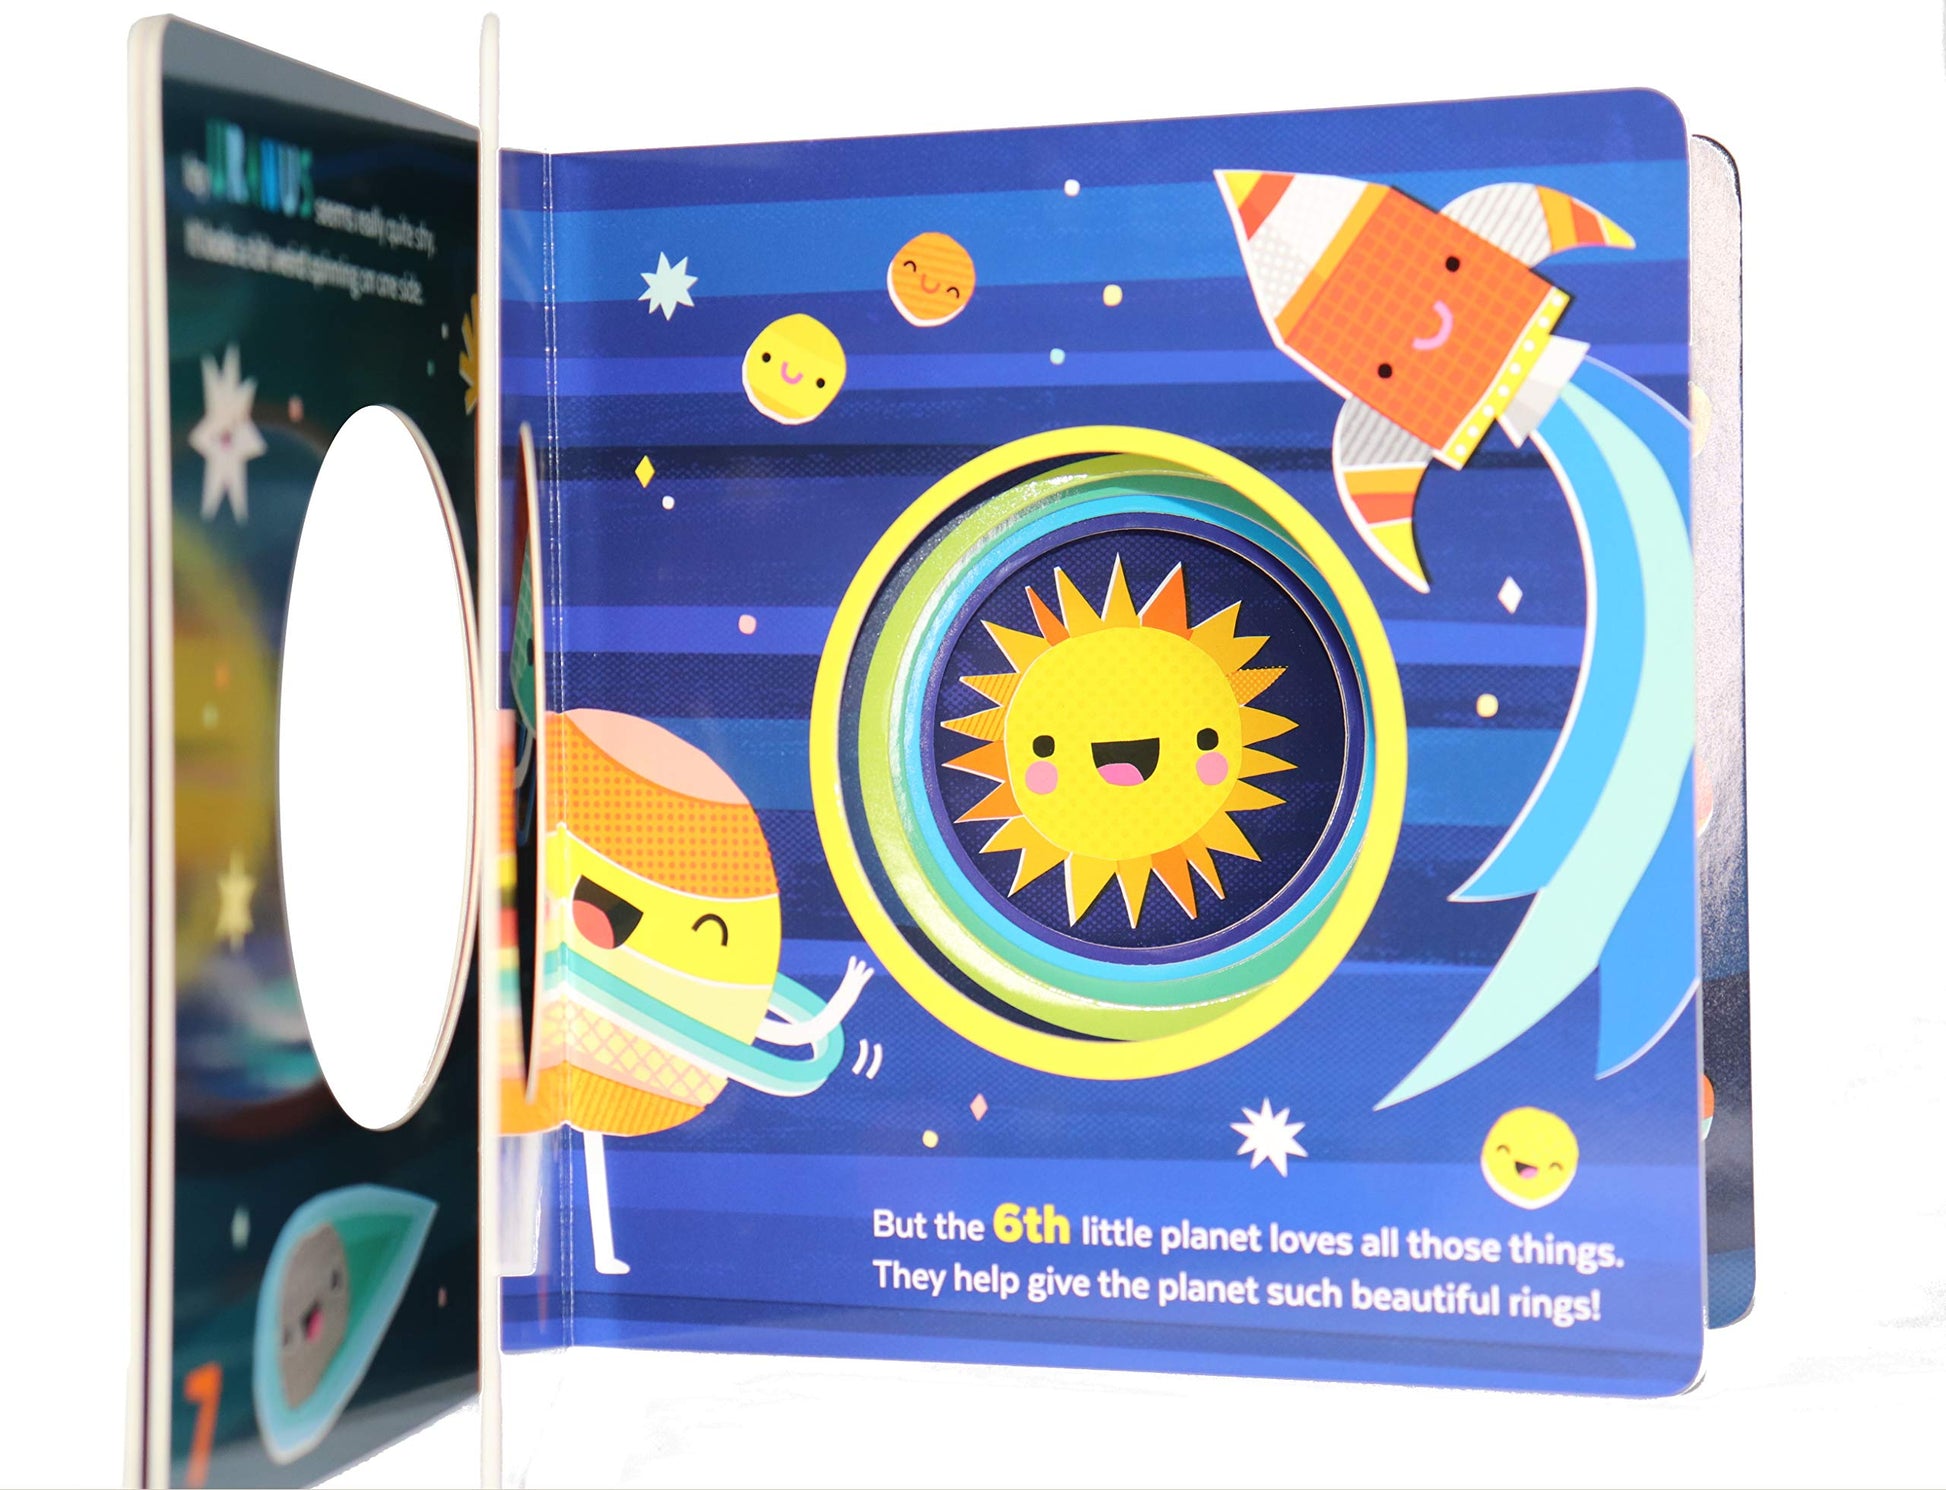 8 little planets chris ferrie lizzy doyle kids book children cute space raincoast books sourcebooks explore solar system vibrant art fun fact-filled planetary tale baby university